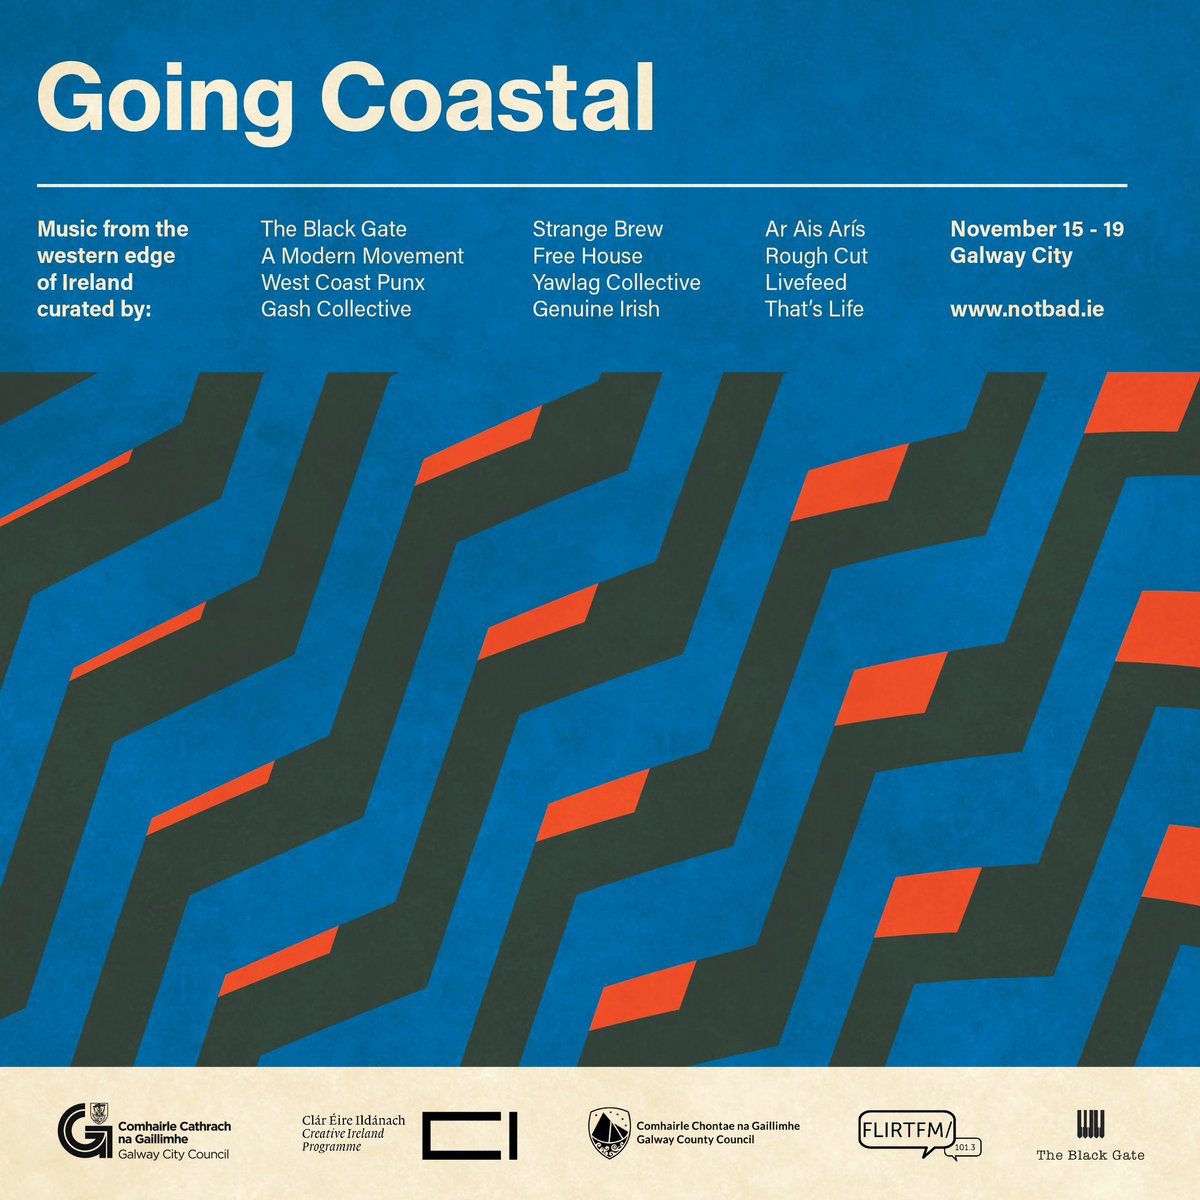 Come ‘ere to me you. Going Coastal is funded by Galway City Council and the Galway City Creative Ireland Programme, with support from the Galway County Creative Ireland Programme and Flirt Fm. #LinkInBio @notbad_ie @blackgategalway @CreativeIreland @GalwayCityCo @FlirtFM